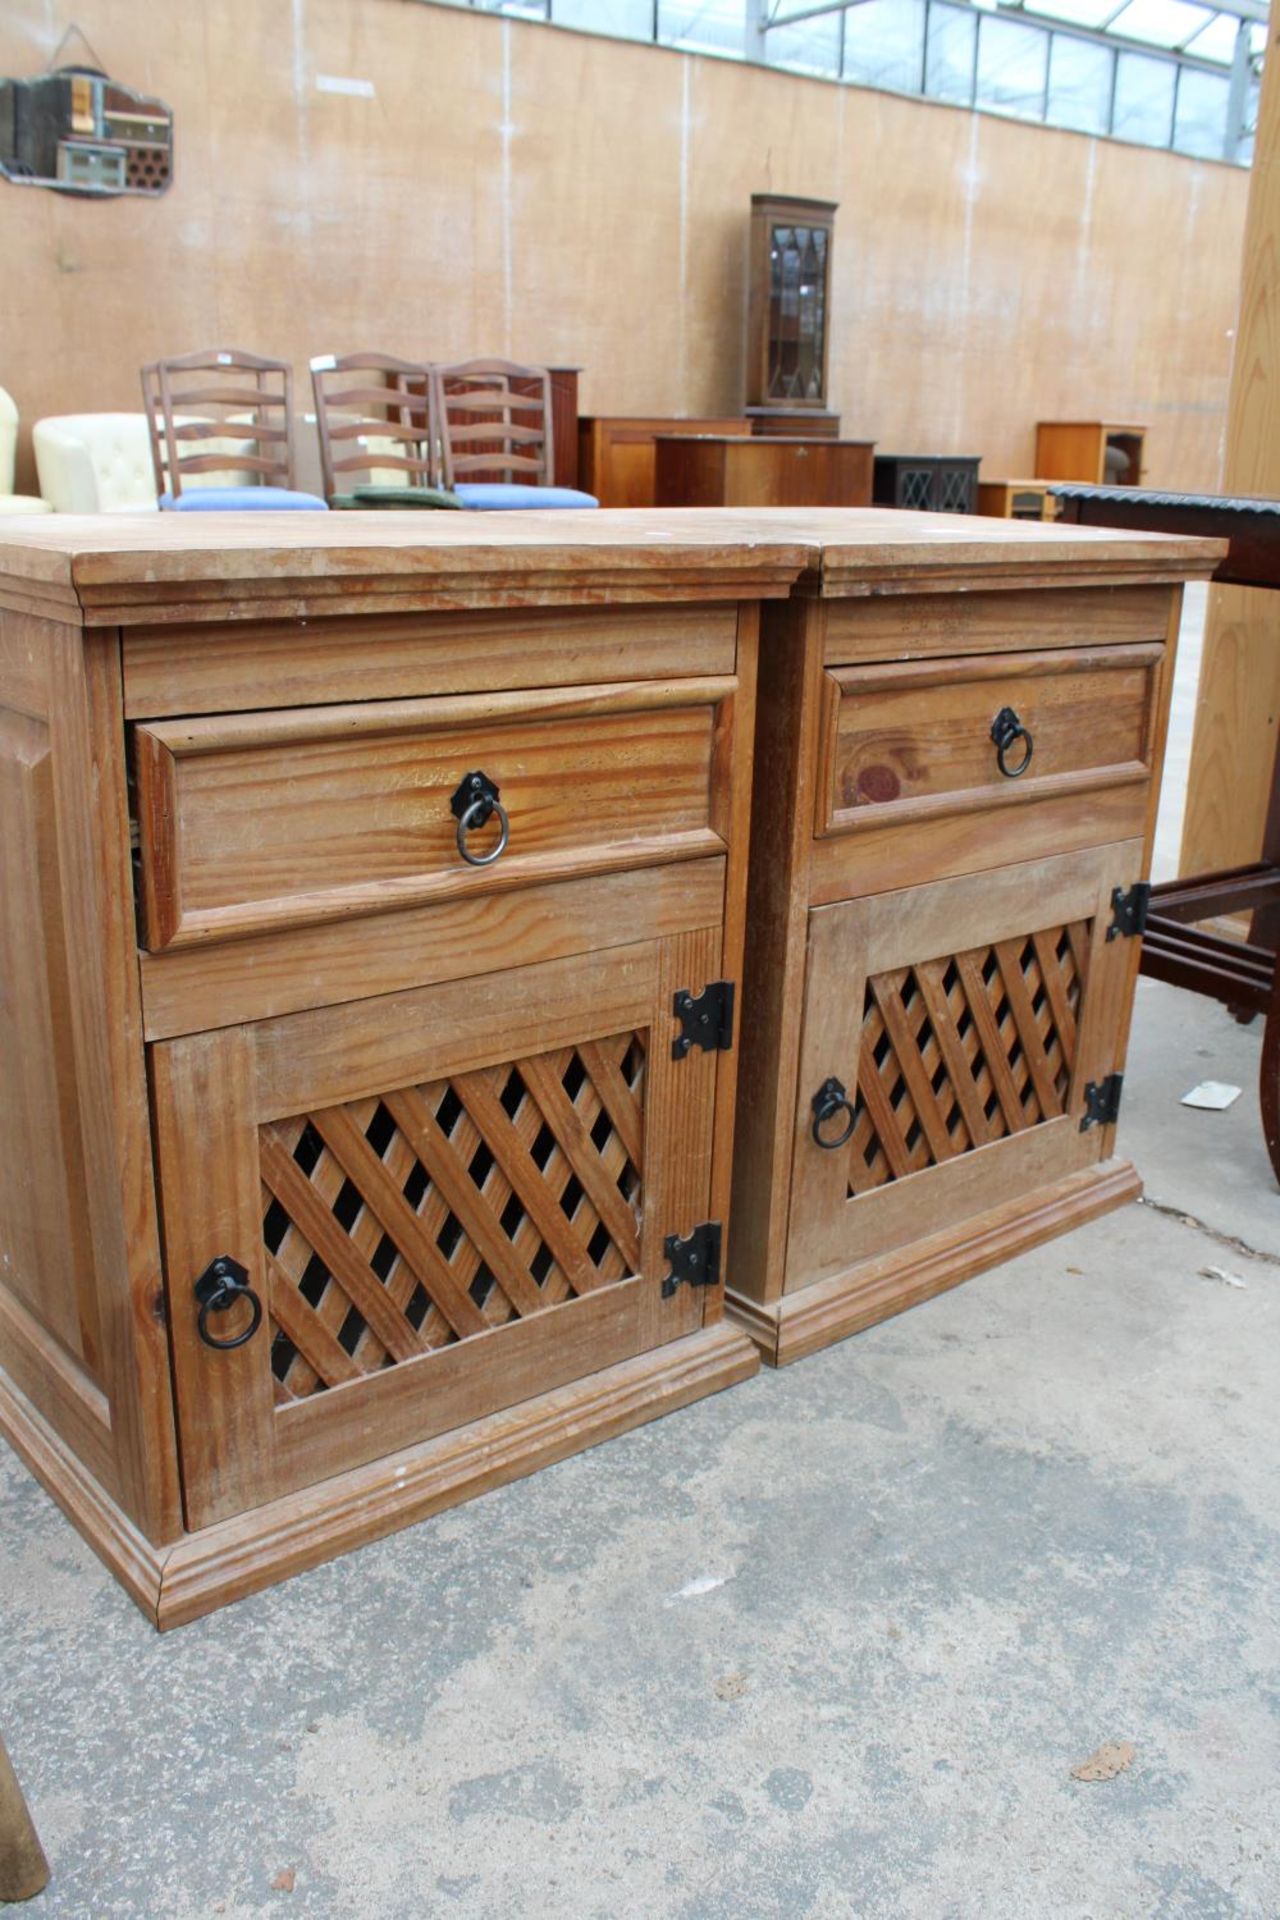 A PAIR OF MEXICAN PINE BEDSIDE CUPBOARDS WITH LATTICE WORK DOORS - Image 2 of 2